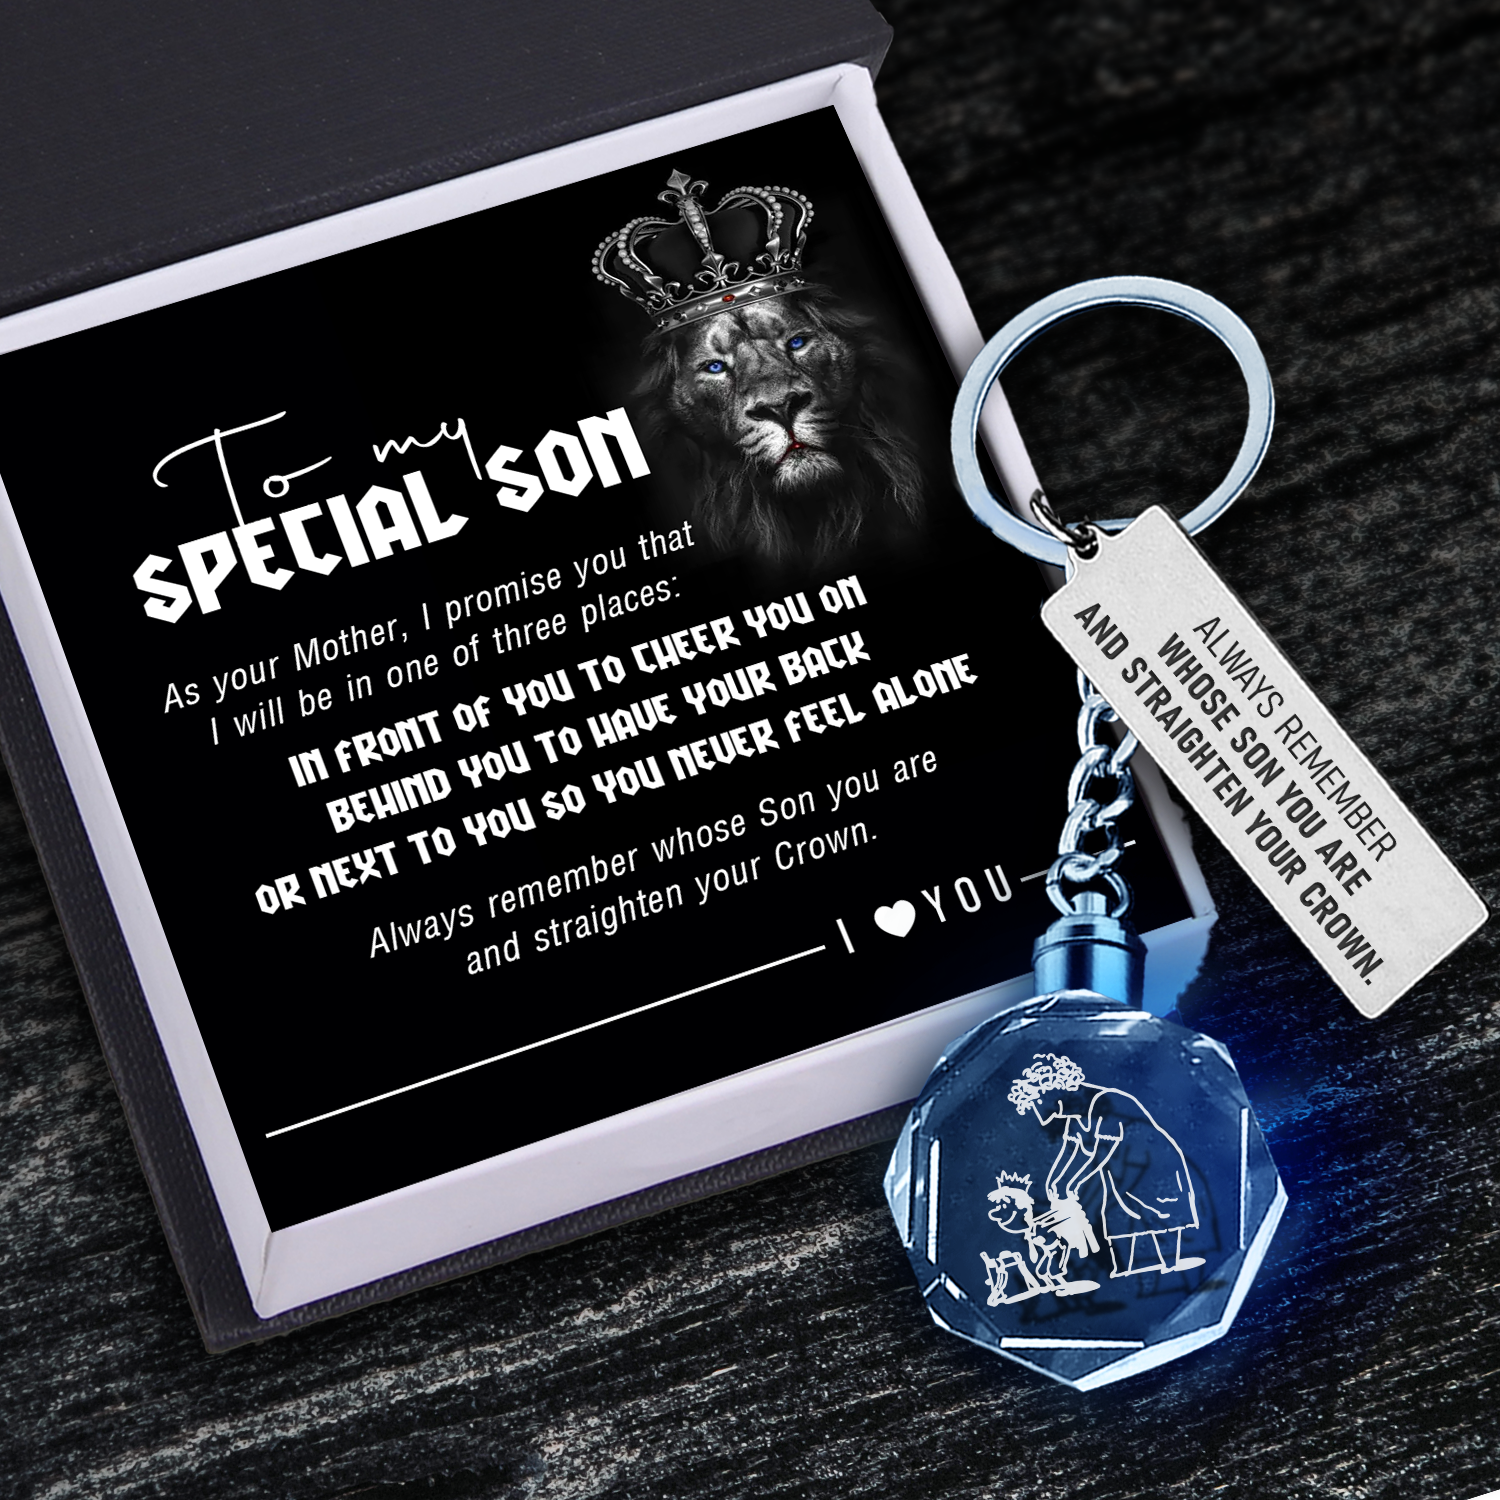 Led Light Keychain - Family - To My Son - As Your Mother, I Promise You That  - Ukgkwl16002